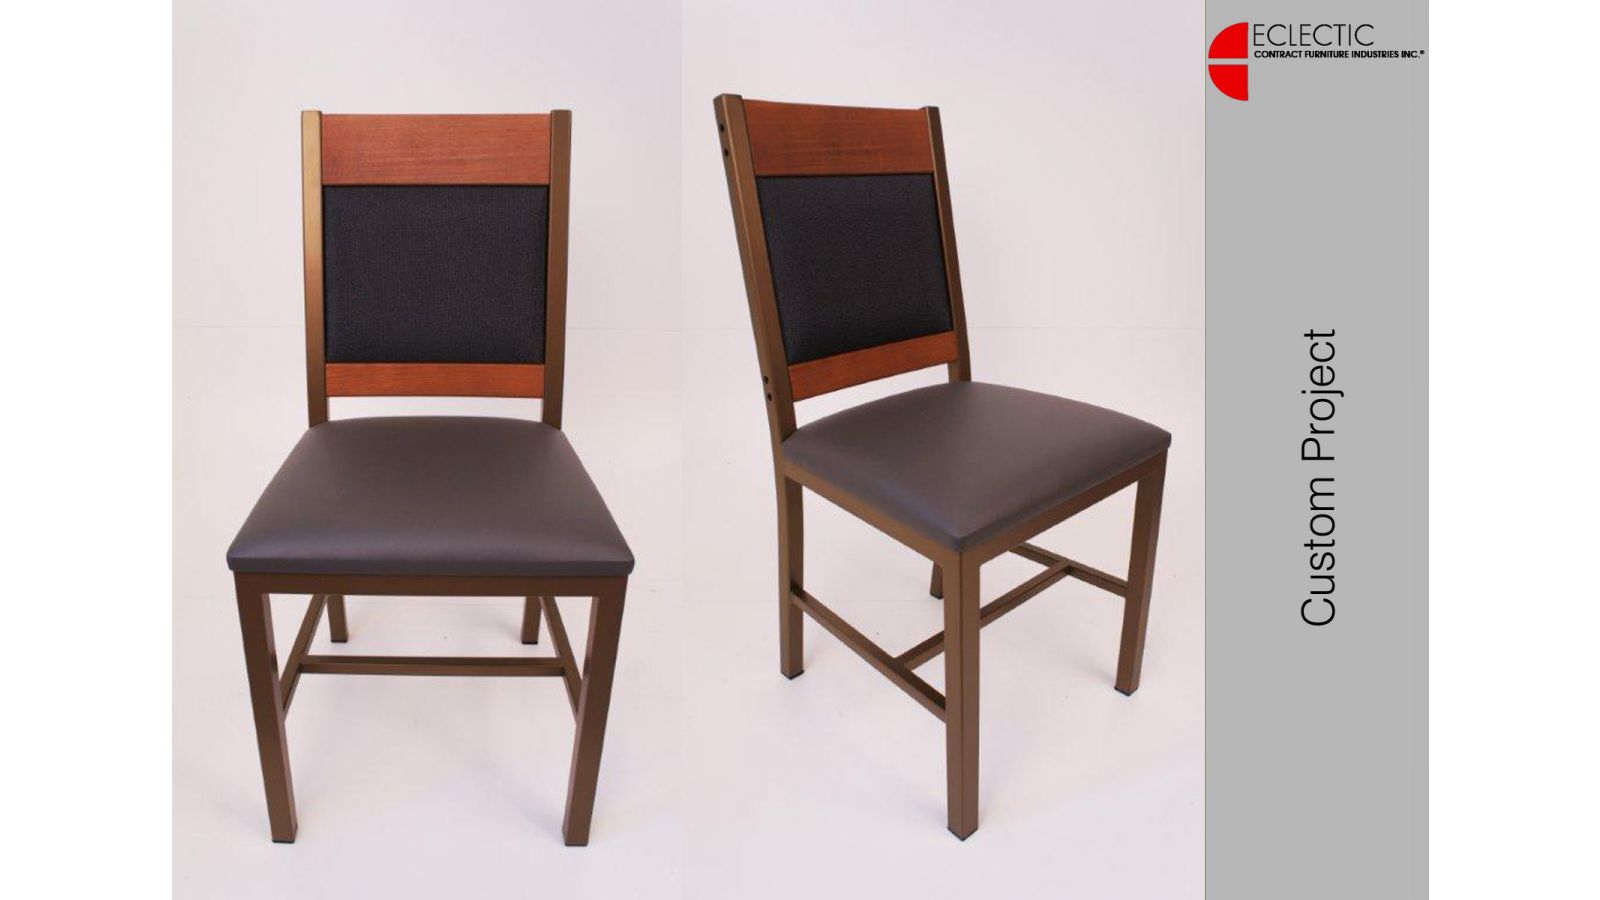 Sustainble dining chair